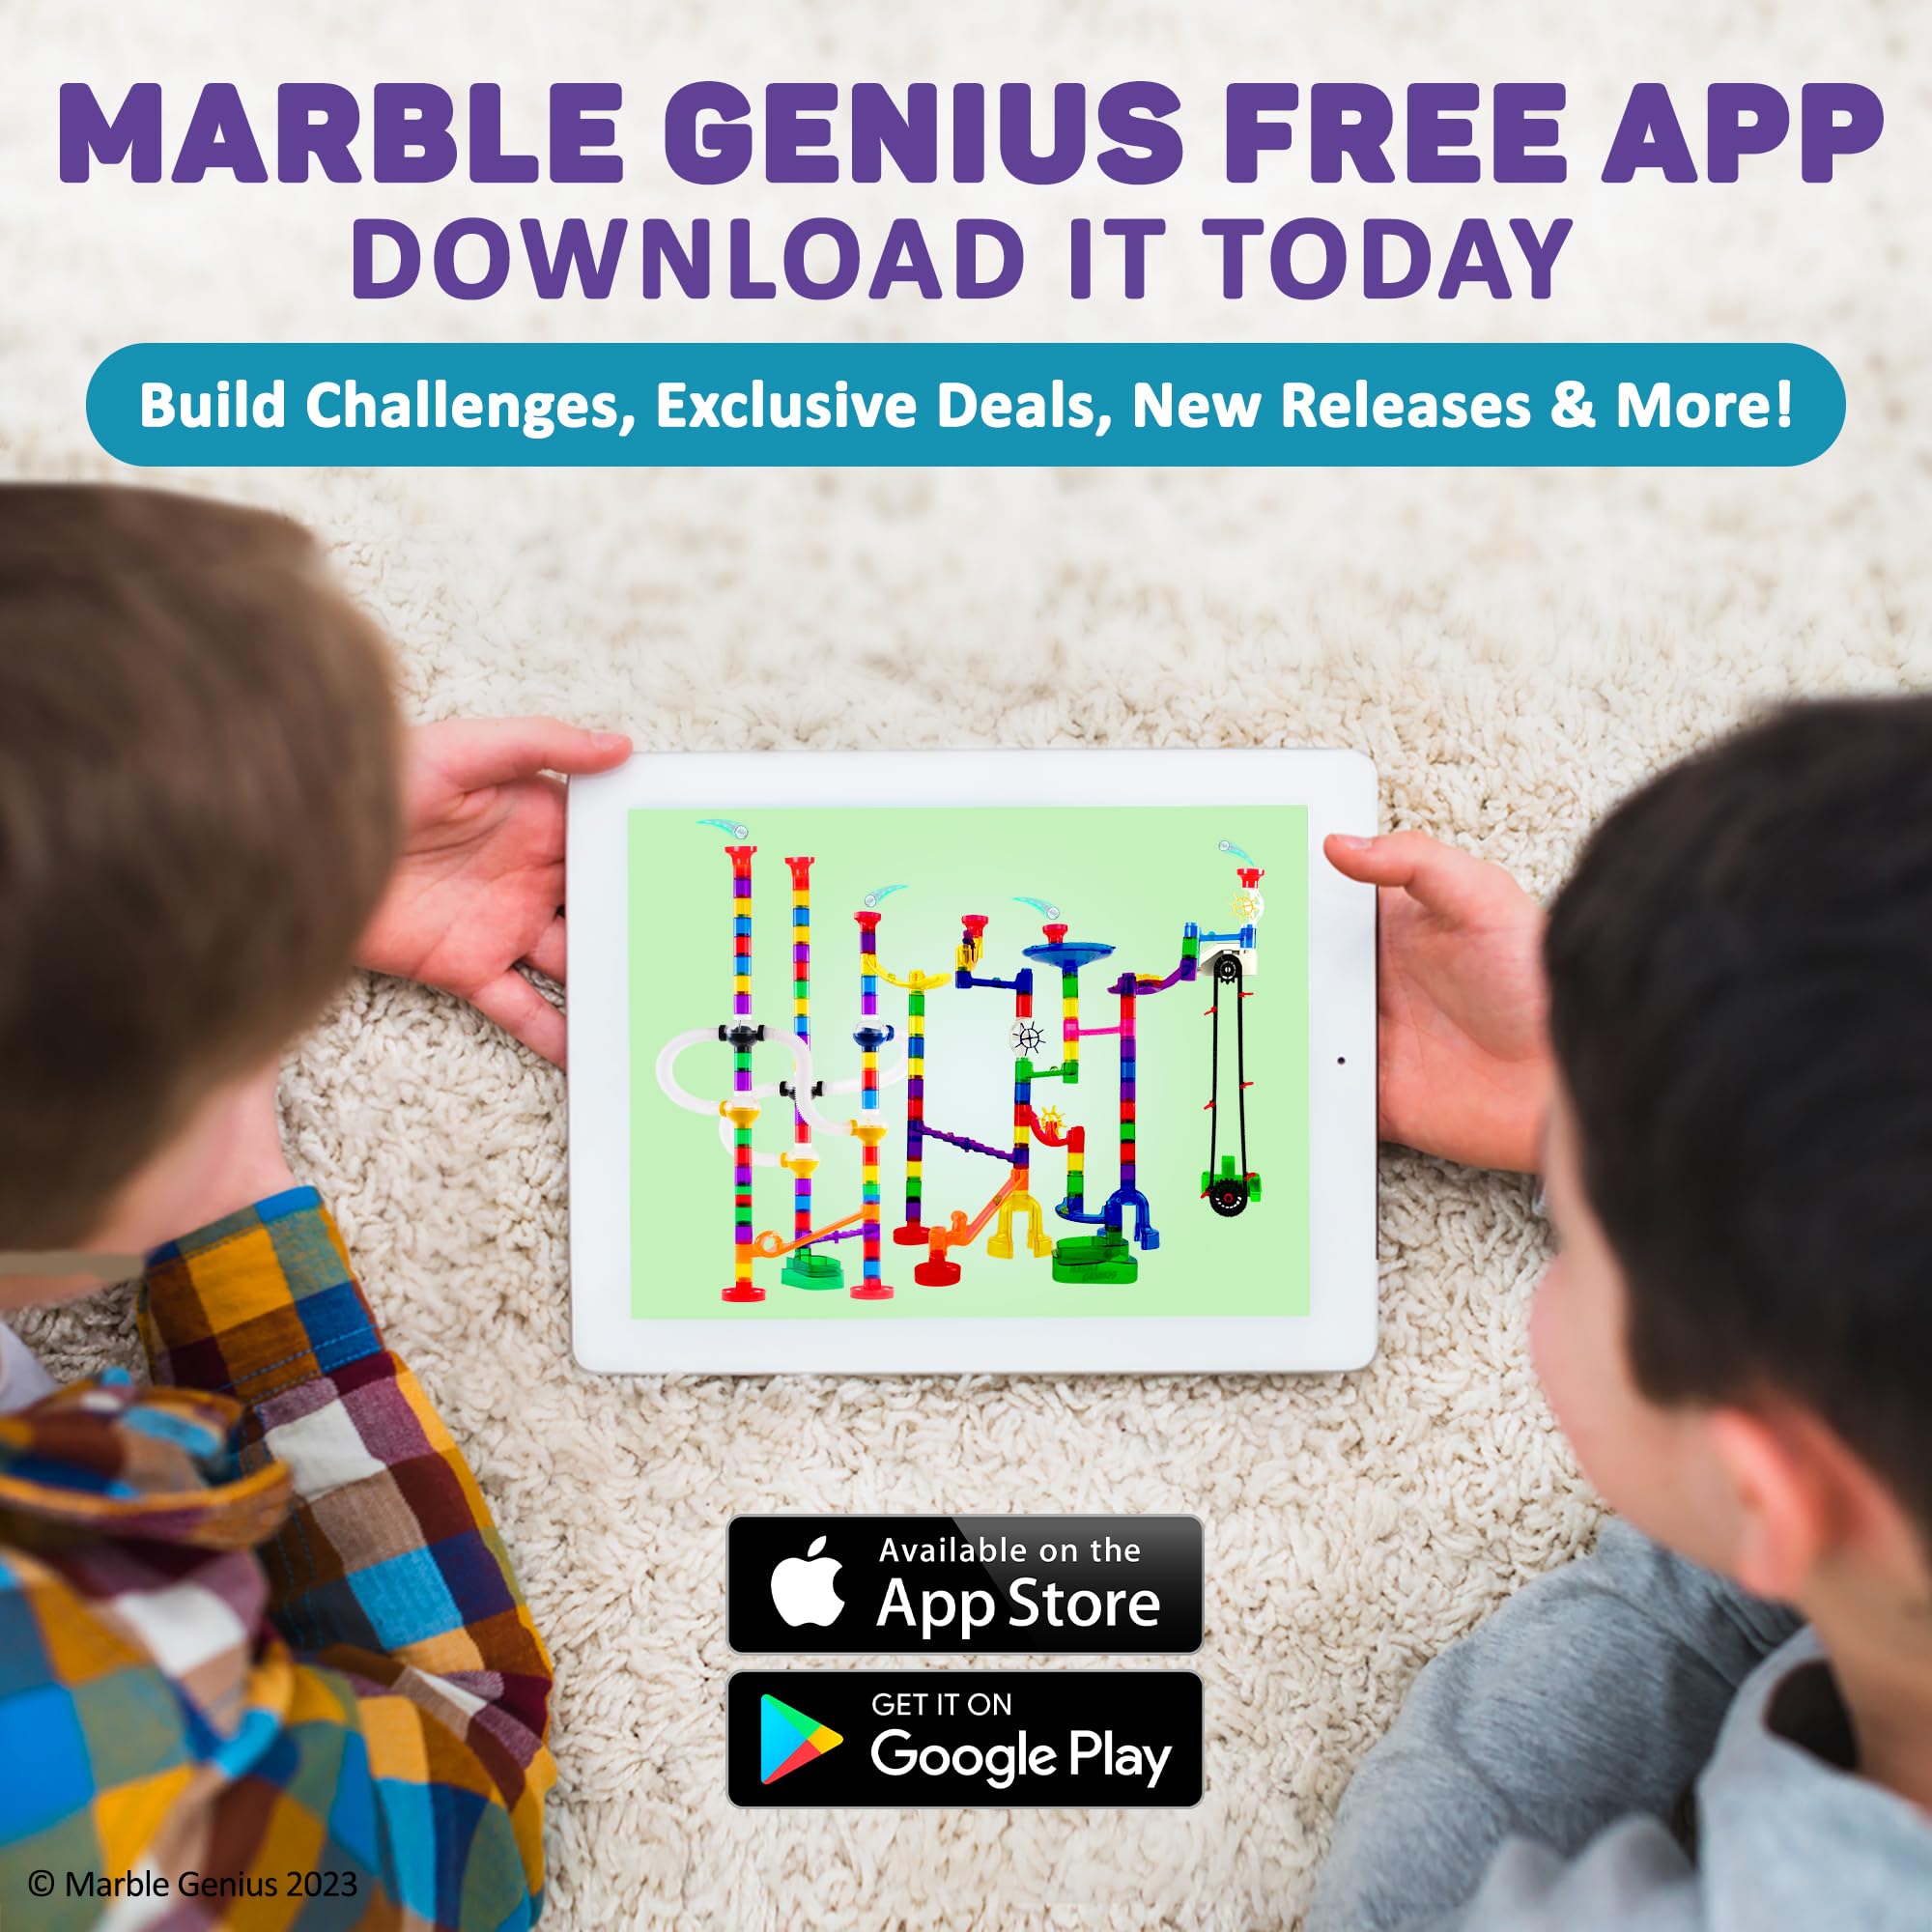 Marble Genius Bundle: Automatic Chain Lift, Pipes, Spheres, and, Tubes, The Perfect Marble Run Accessory Add-On Sets for Creating Exciting Mazes, Tracks, and Races